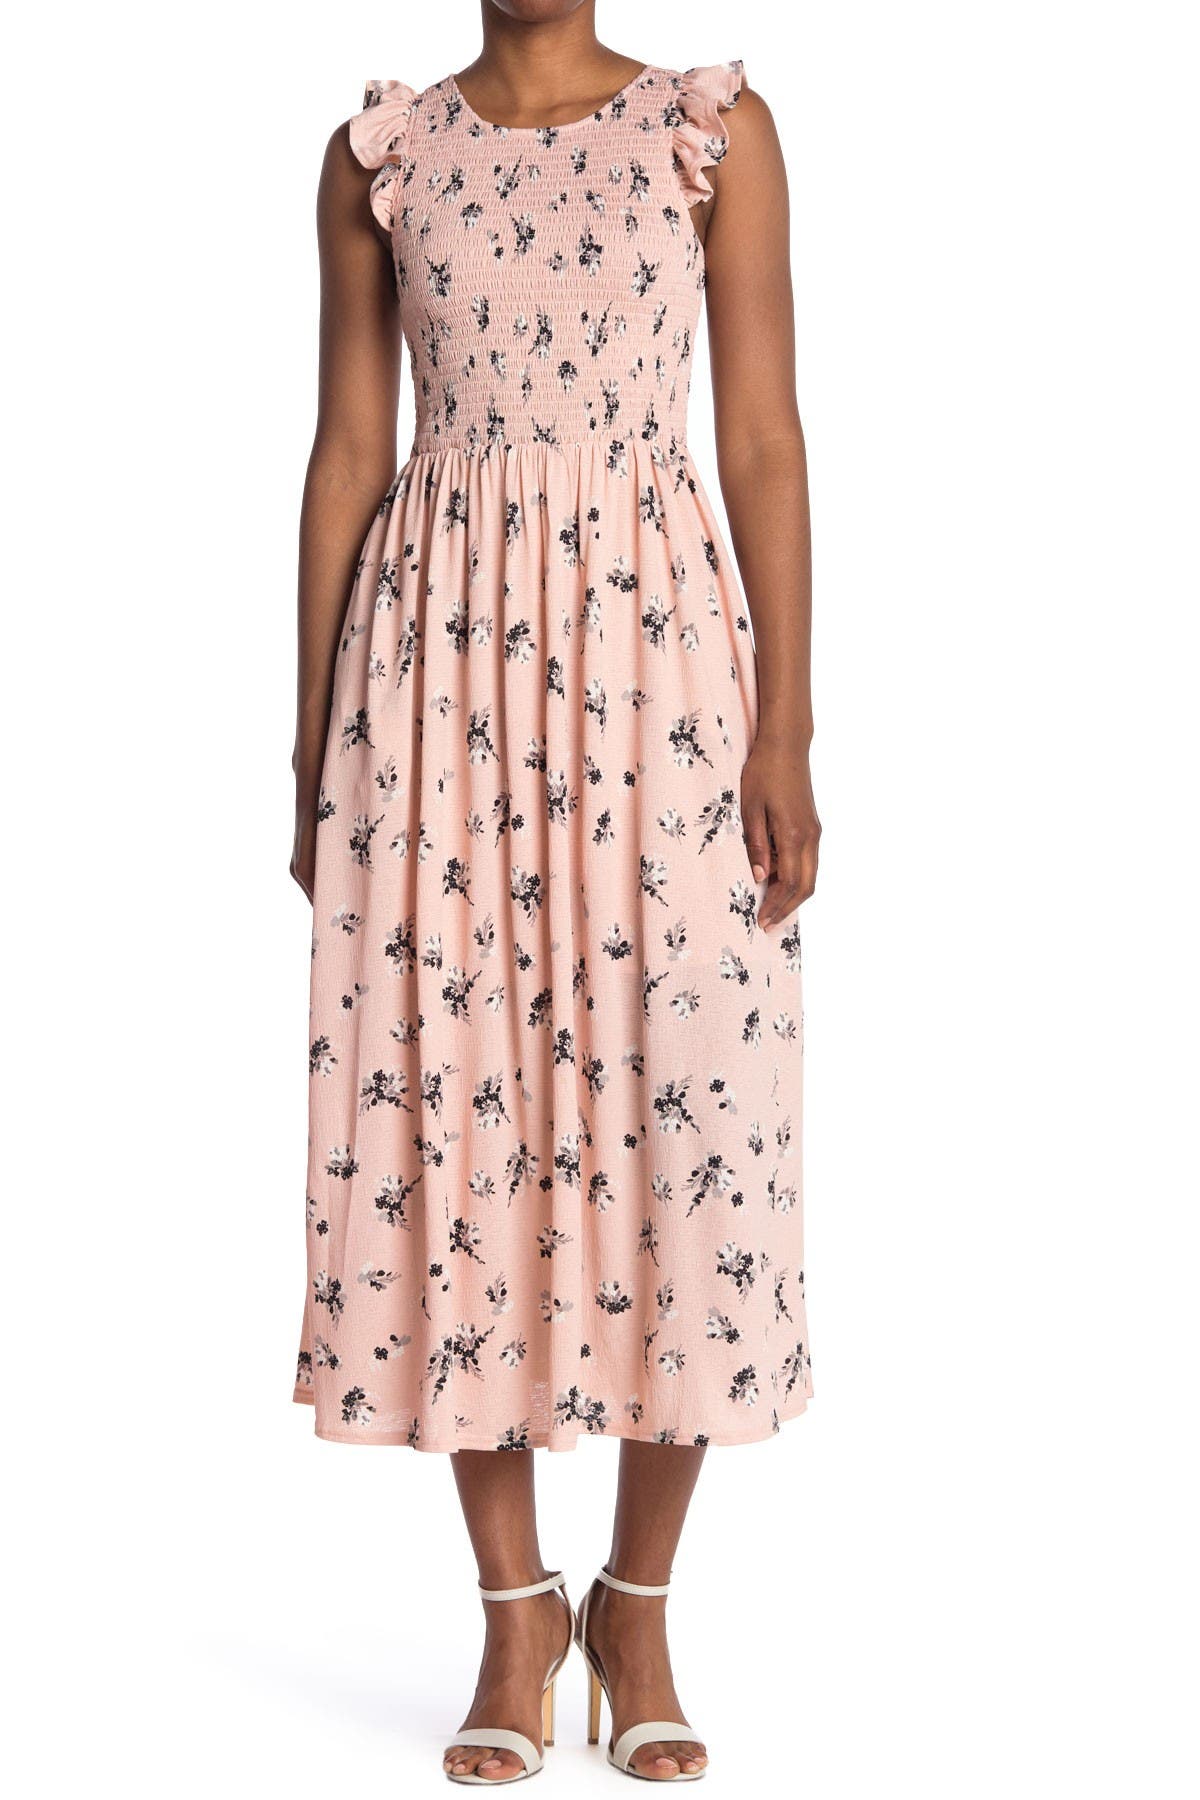 Melloday Sleeveless Floral Print Smocked Top Knit Midi Dress In Open Pink4